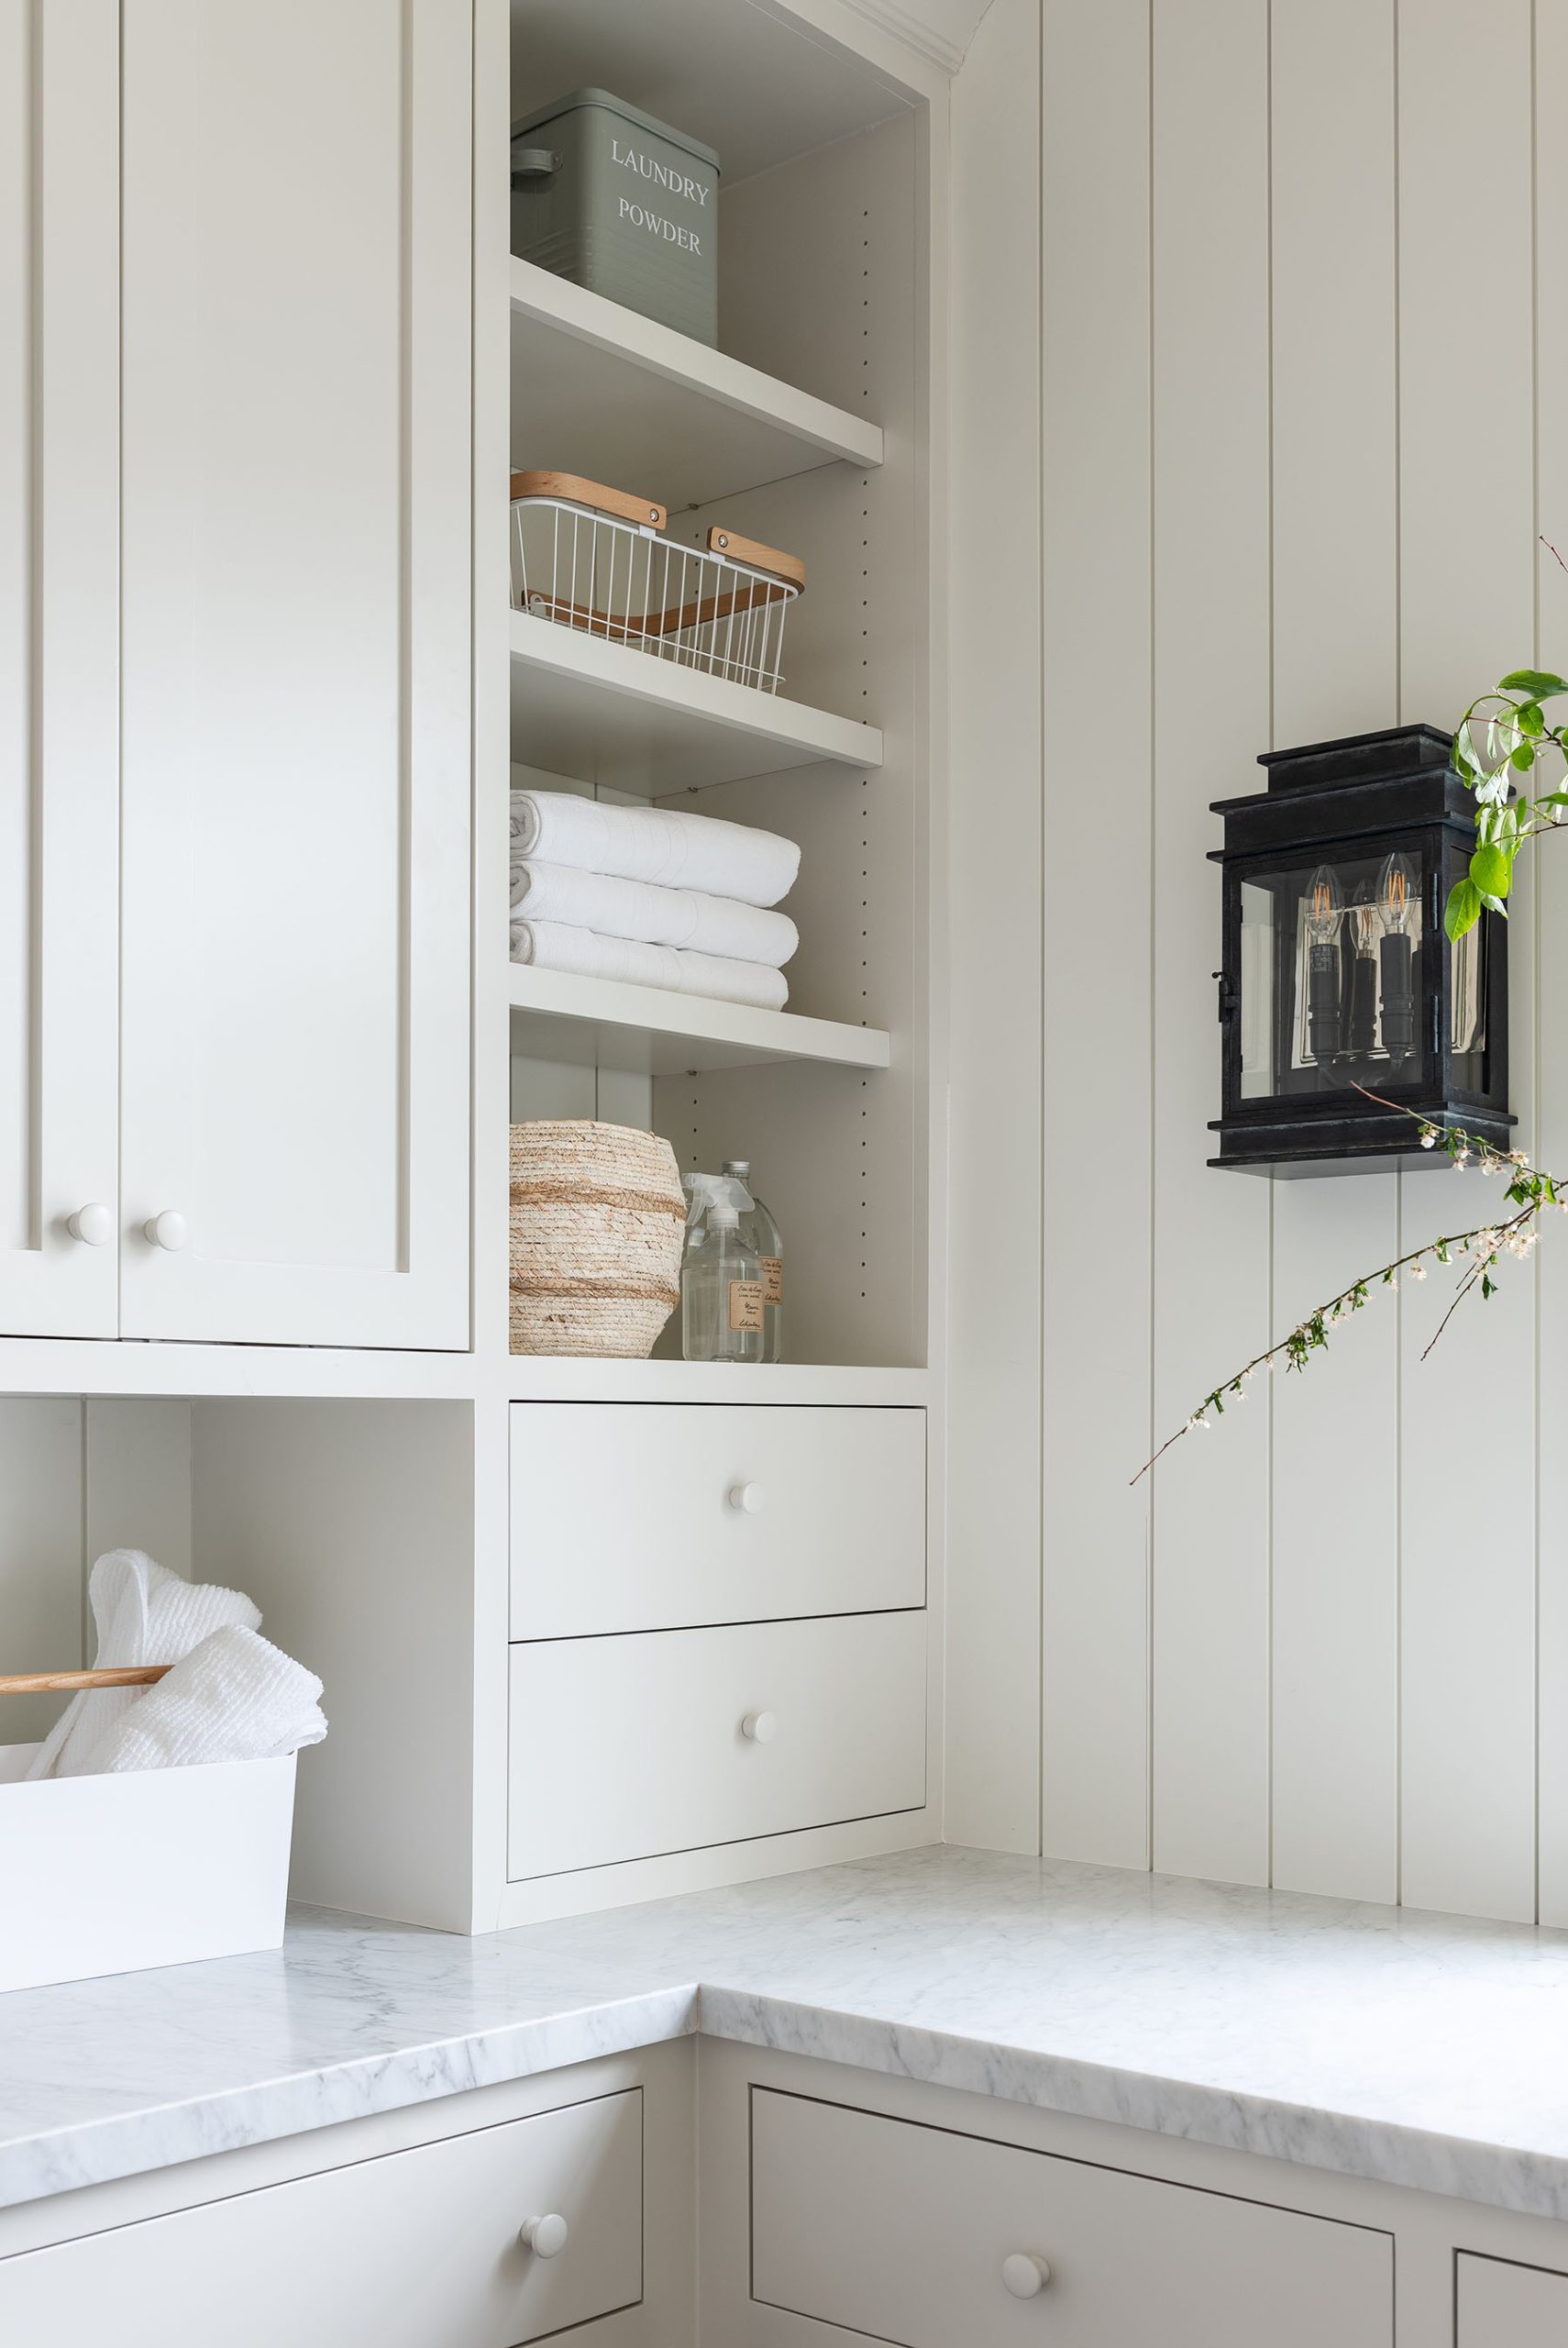 laundry room with white countertops and white cabinetry